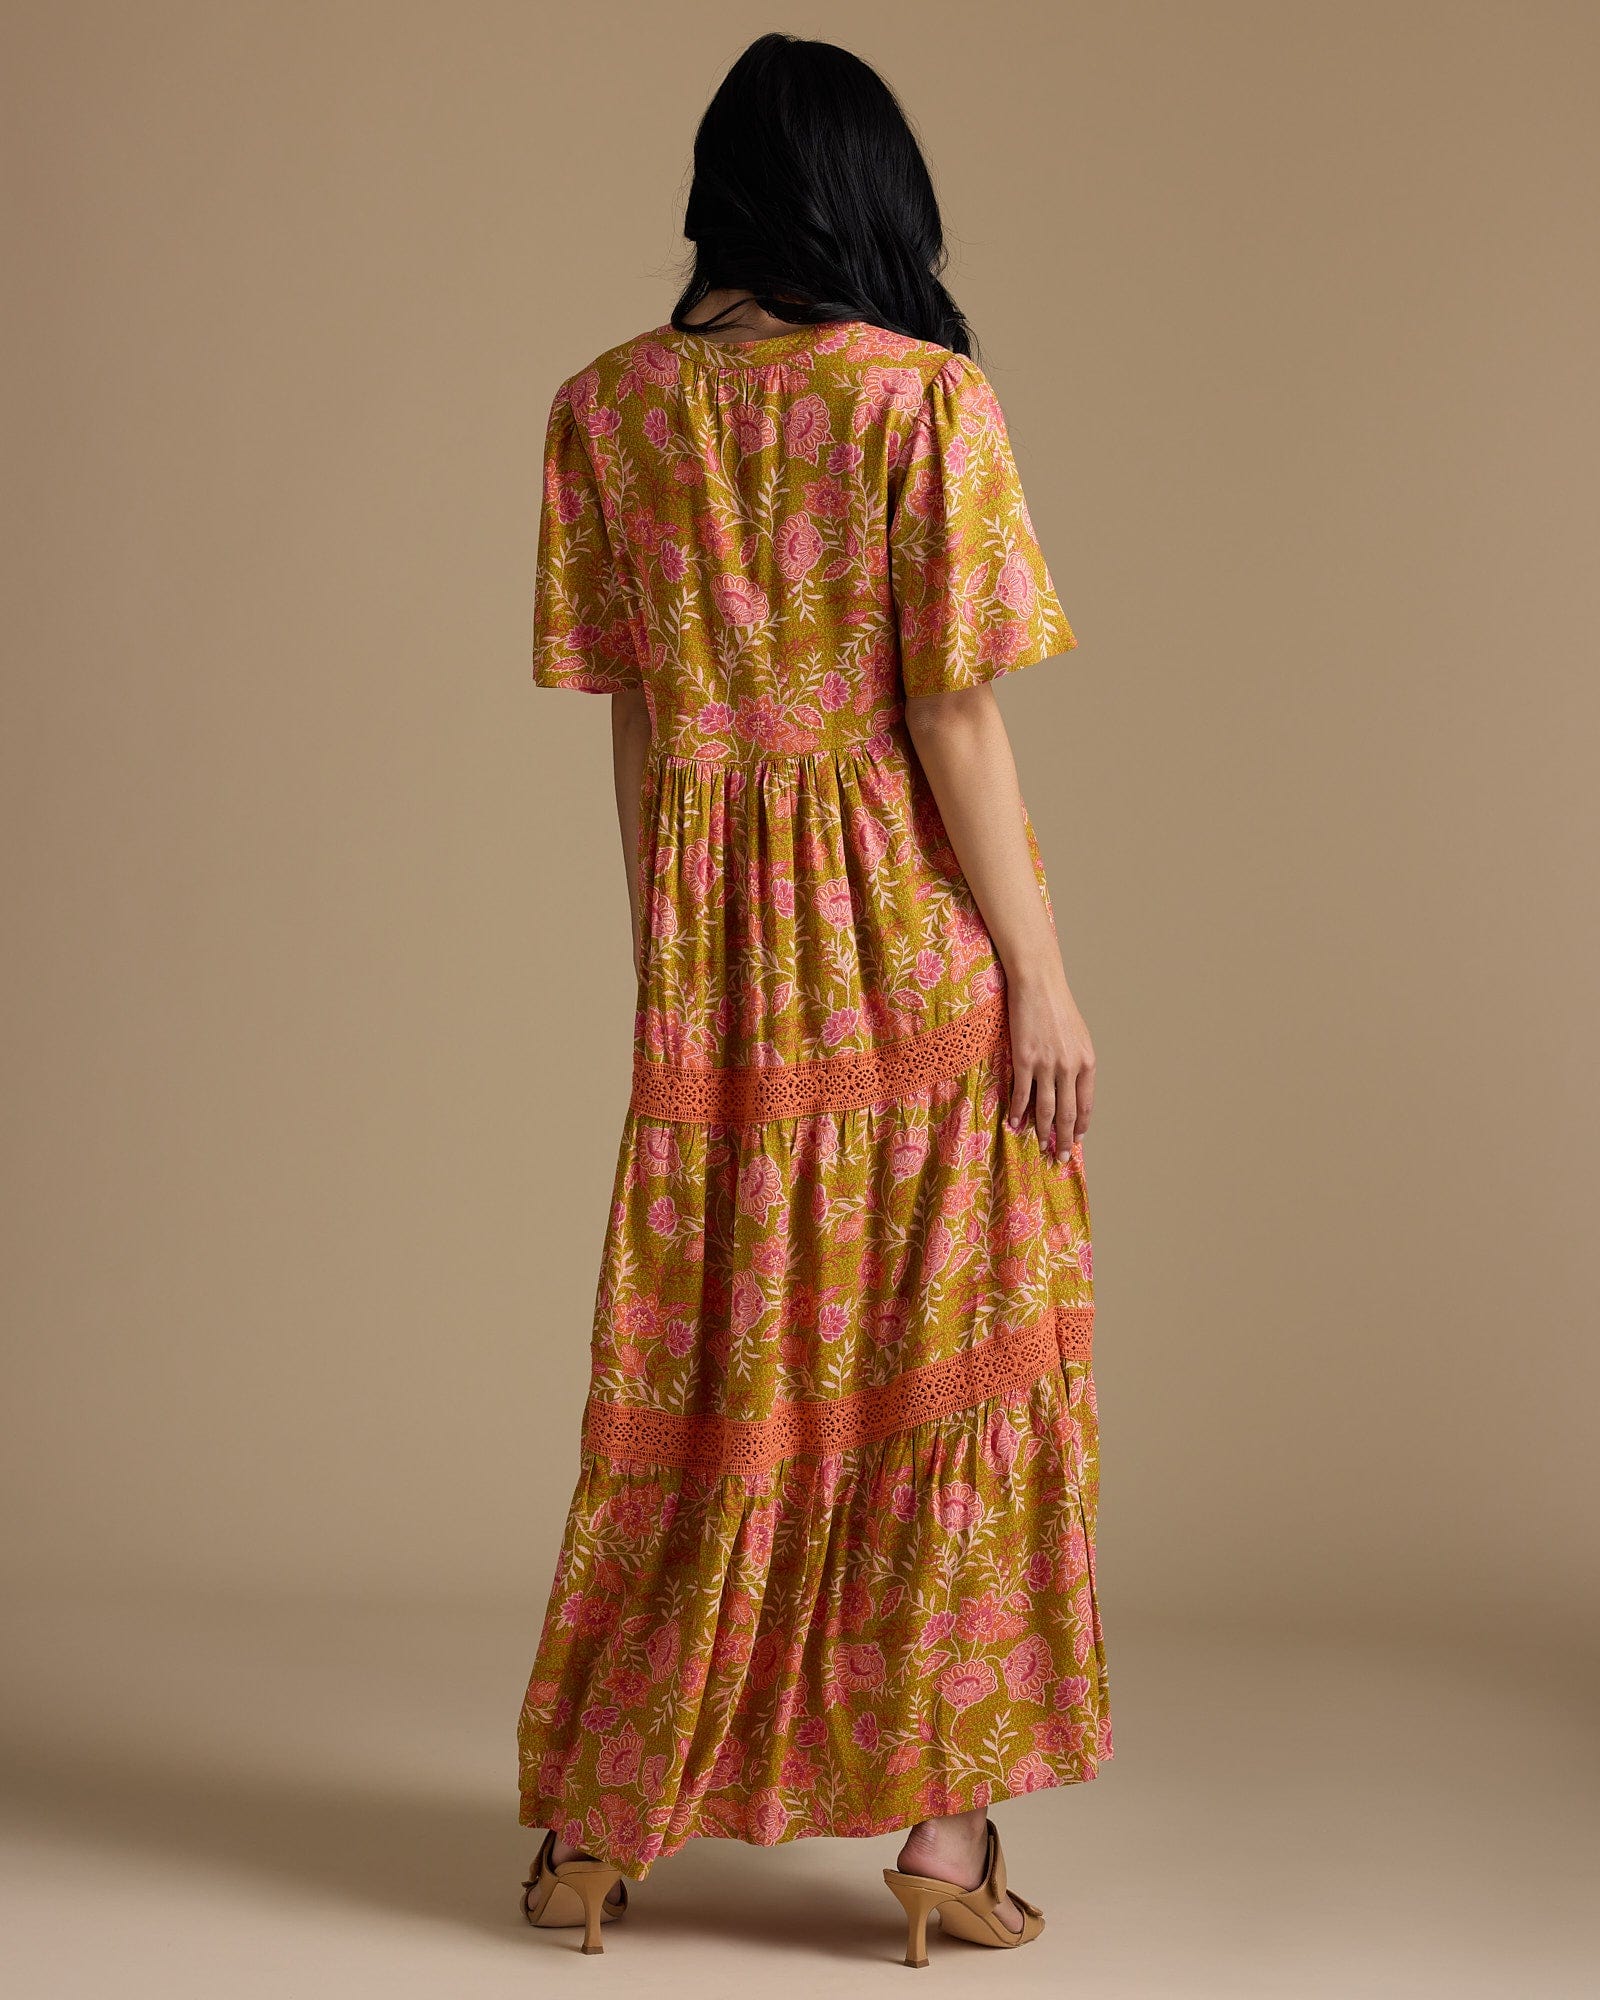 Woman in a half sleeve, maxi-length, orange and gold dress